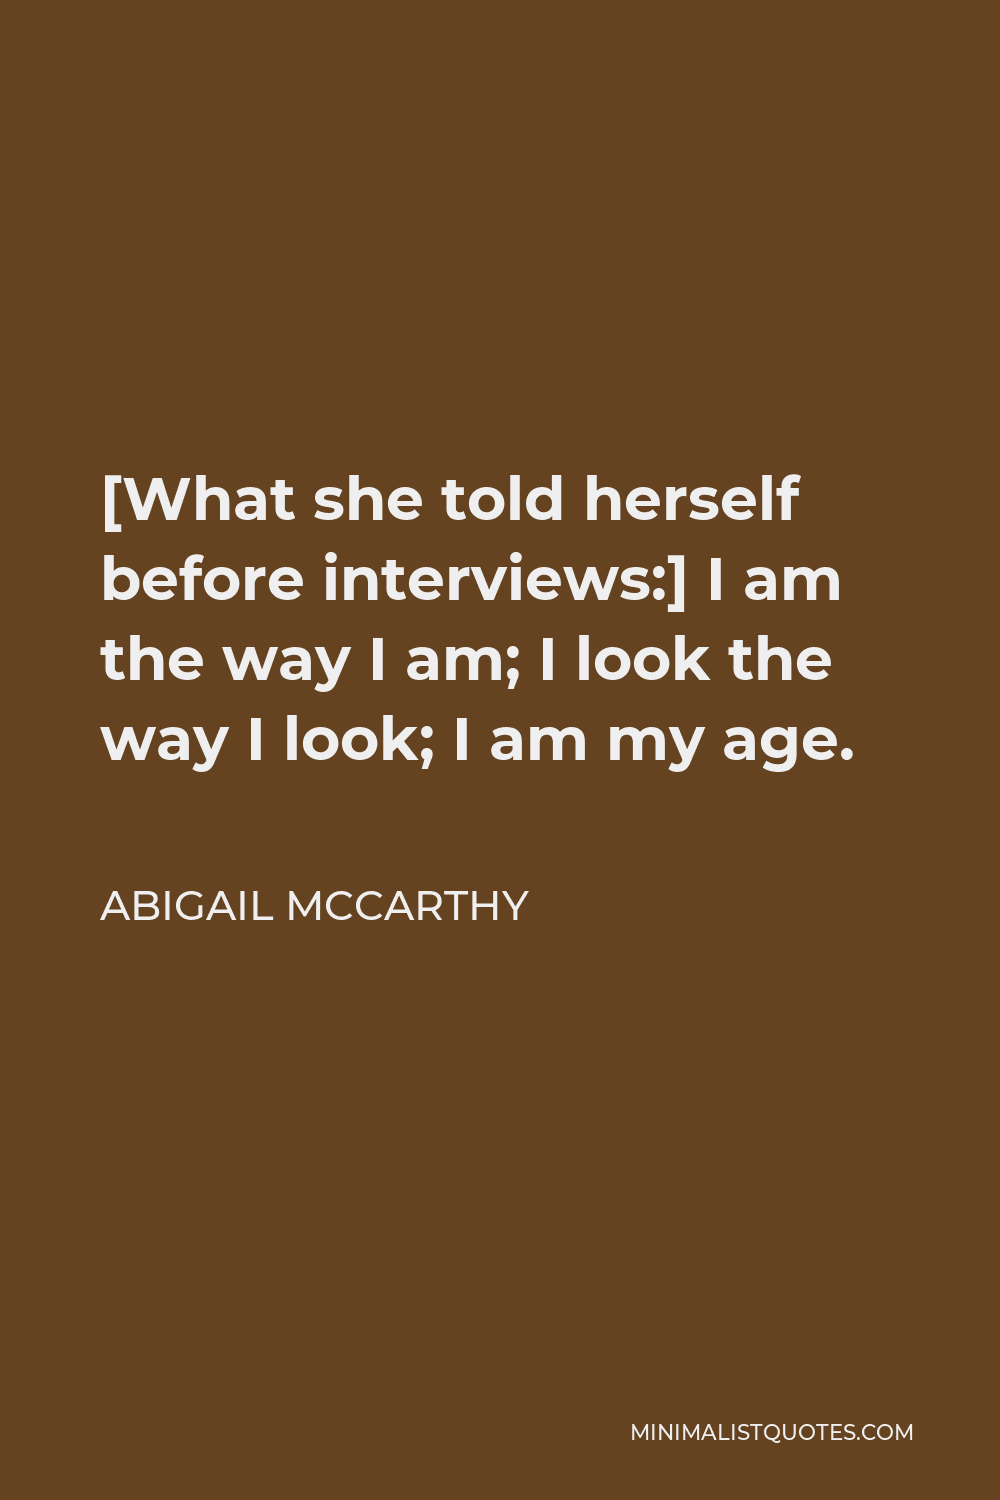 Abigail McCarthy Quote - [What she told herself before interviews:] I am the way I am; I look the way I look; I am my age.